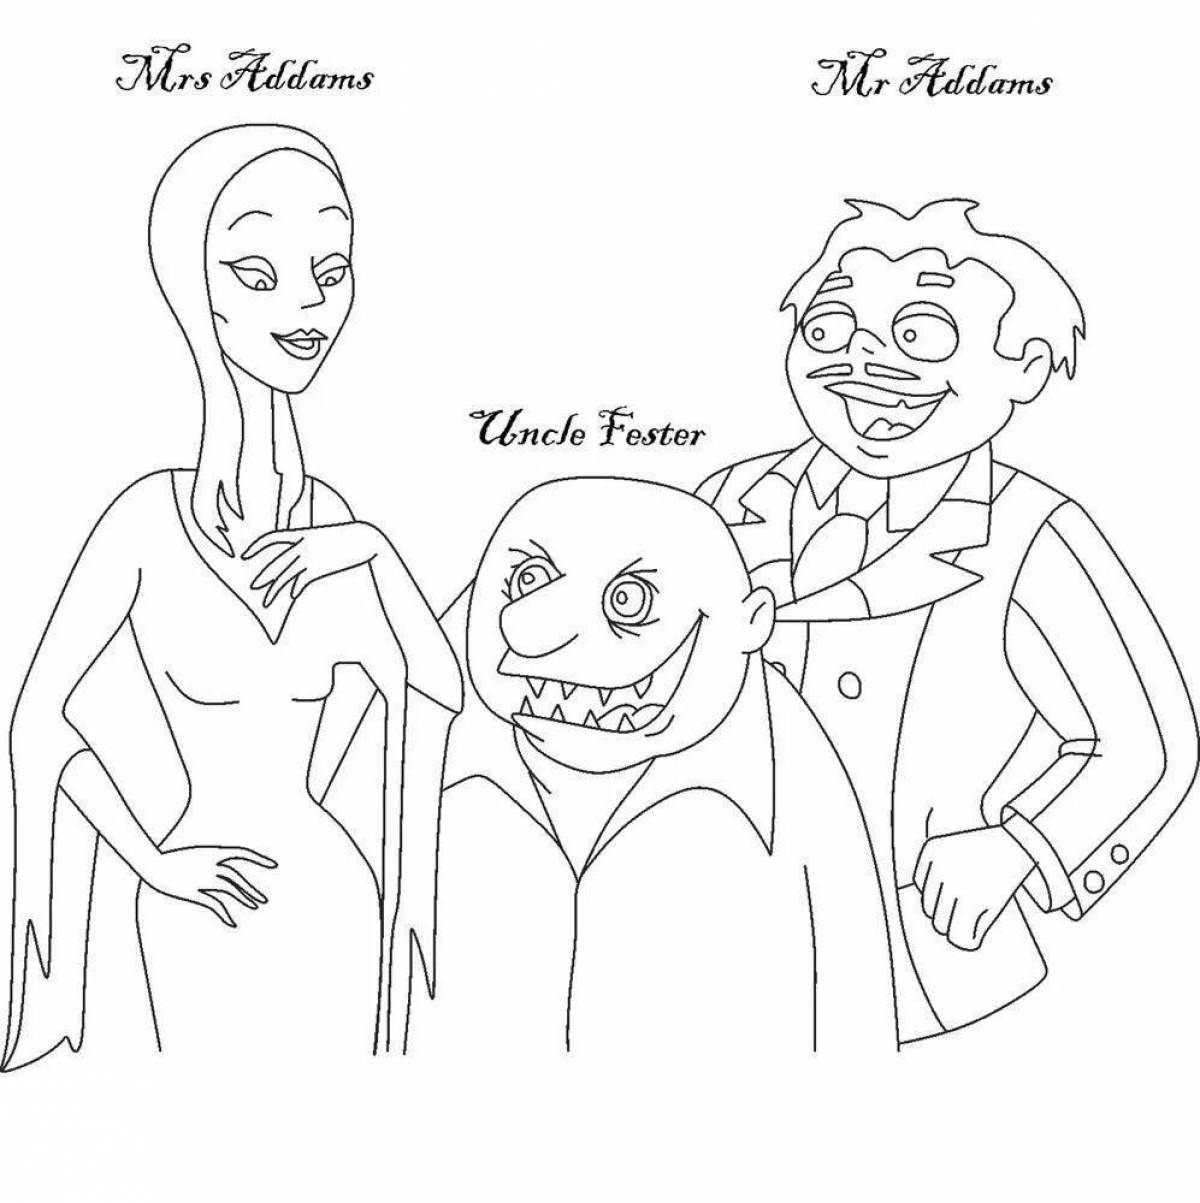 Fun Addams Family coloring book for kids